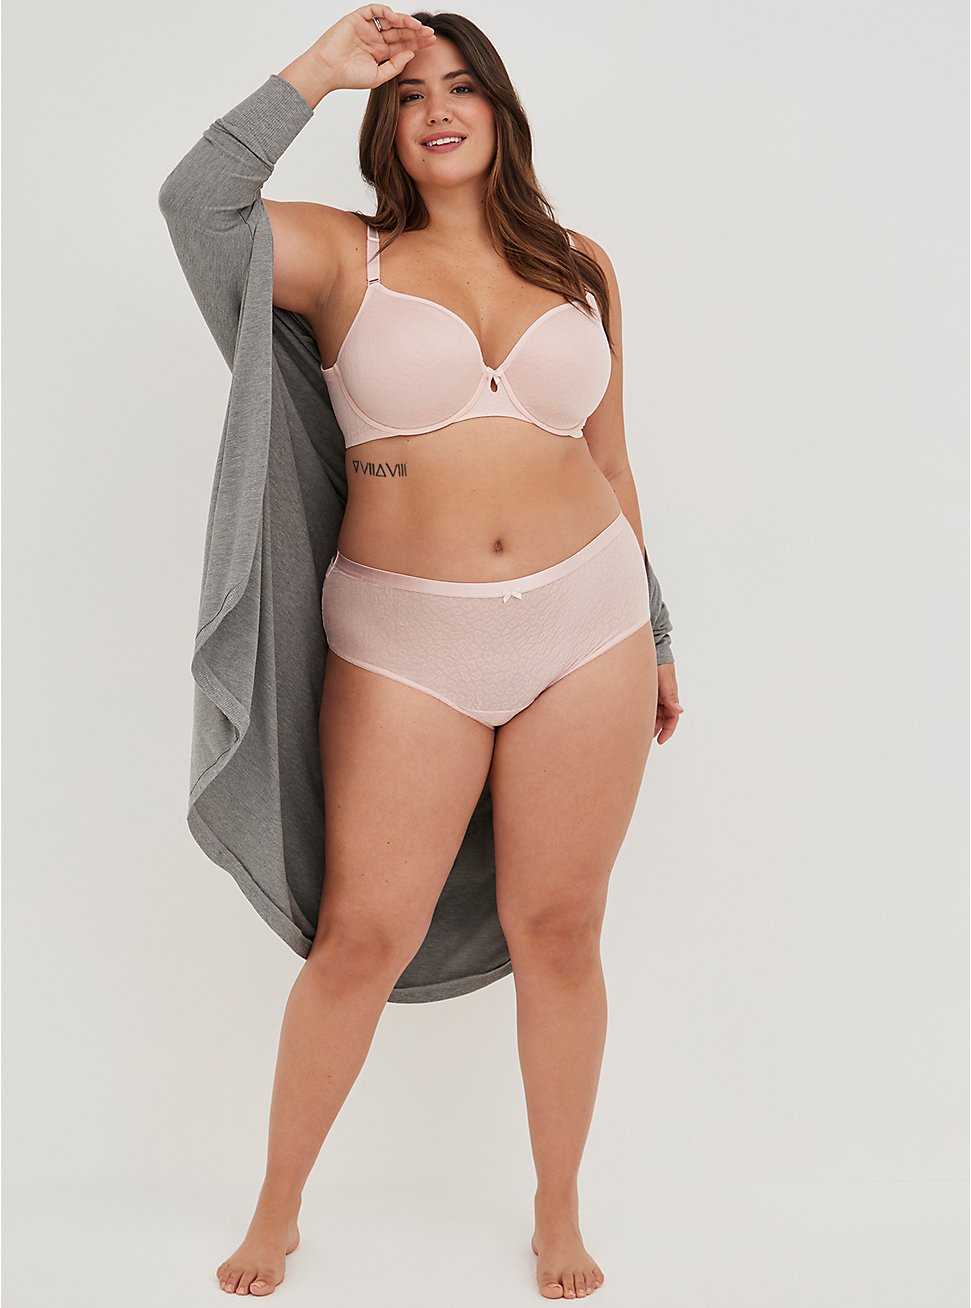 Plus Size Simply Spacer Lace Mid-Rise Cheeky Keyhole Panty, LOTUS, hi-res